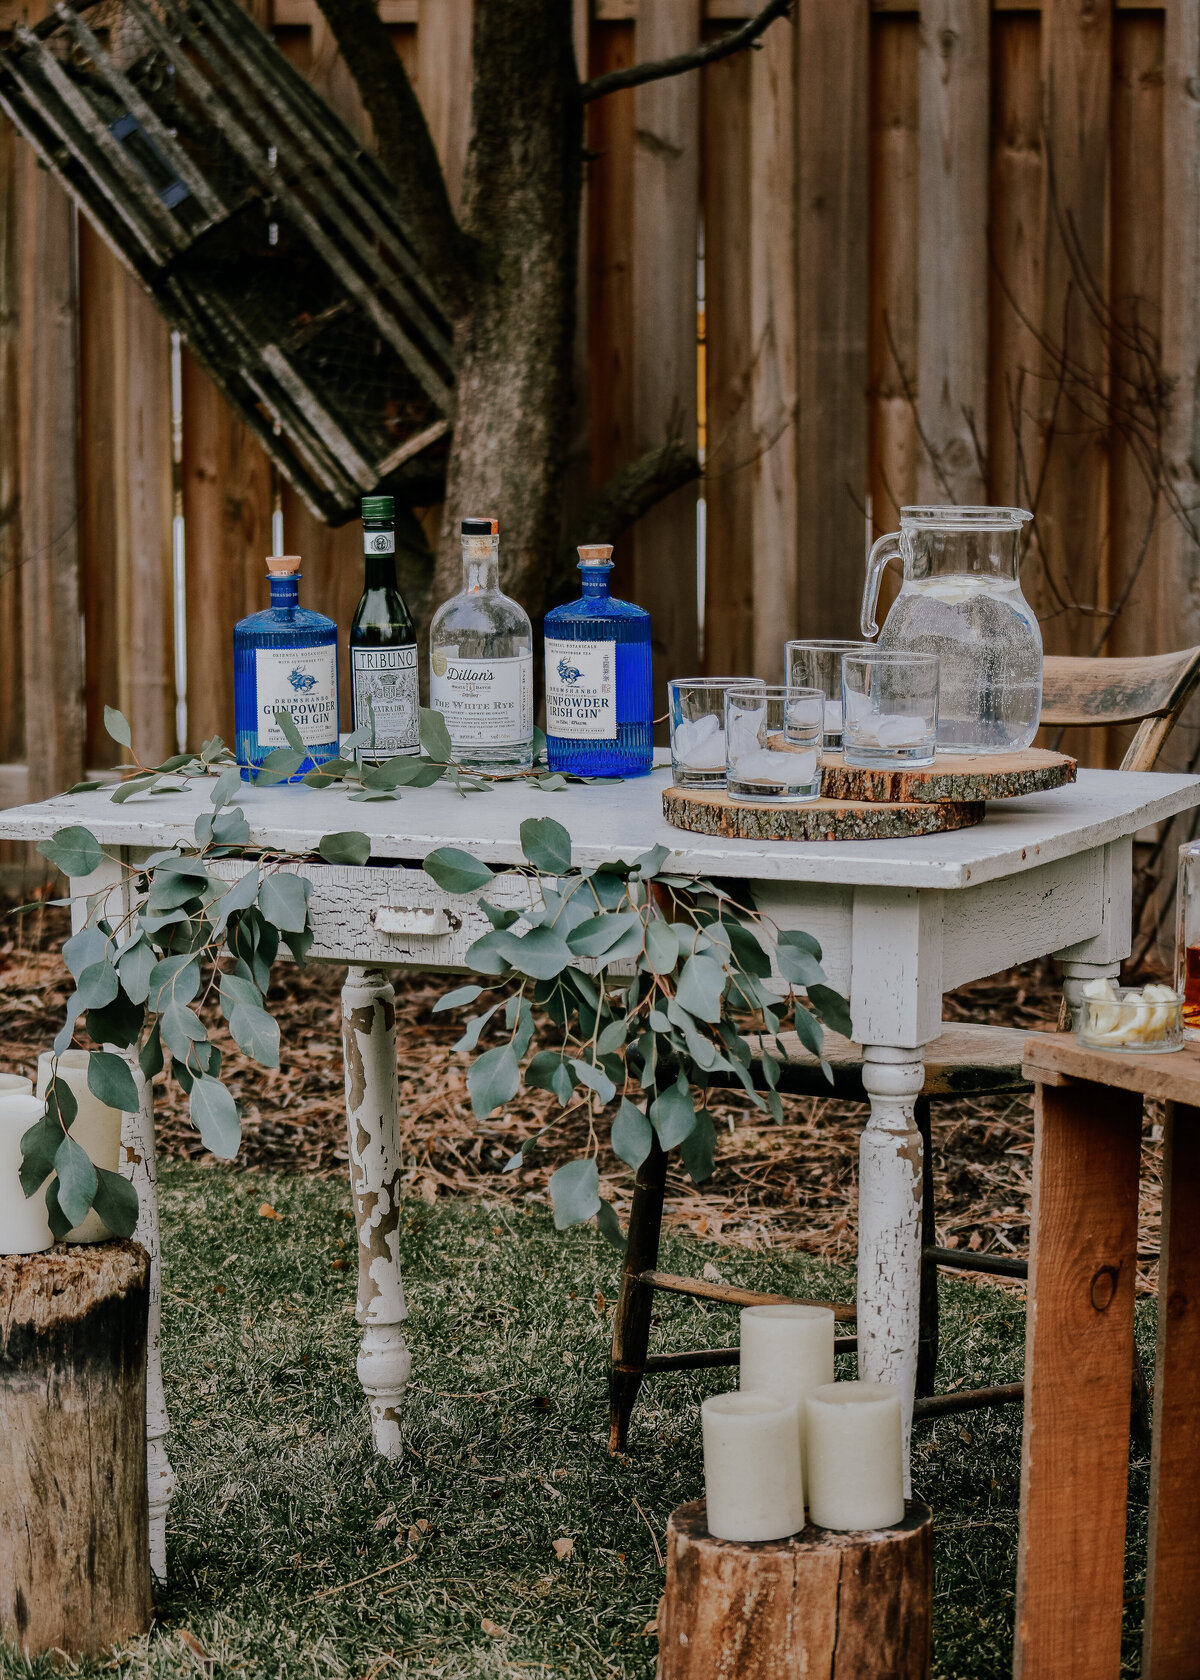 A rustic table set up outside at a wedding or event with gin, greenery and candles.